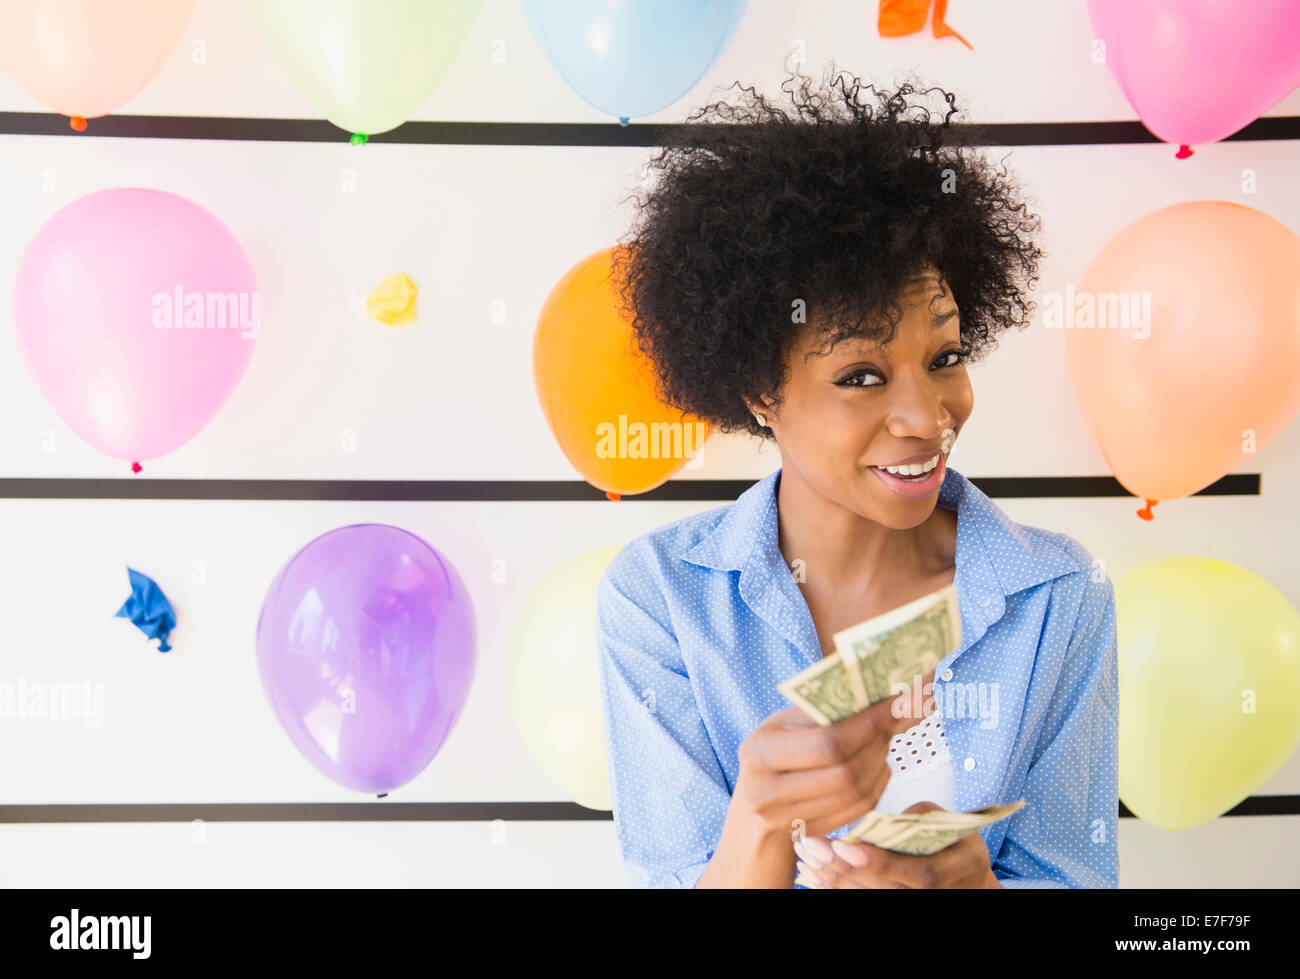 African American woman counting money at balloon wall Stock Photo